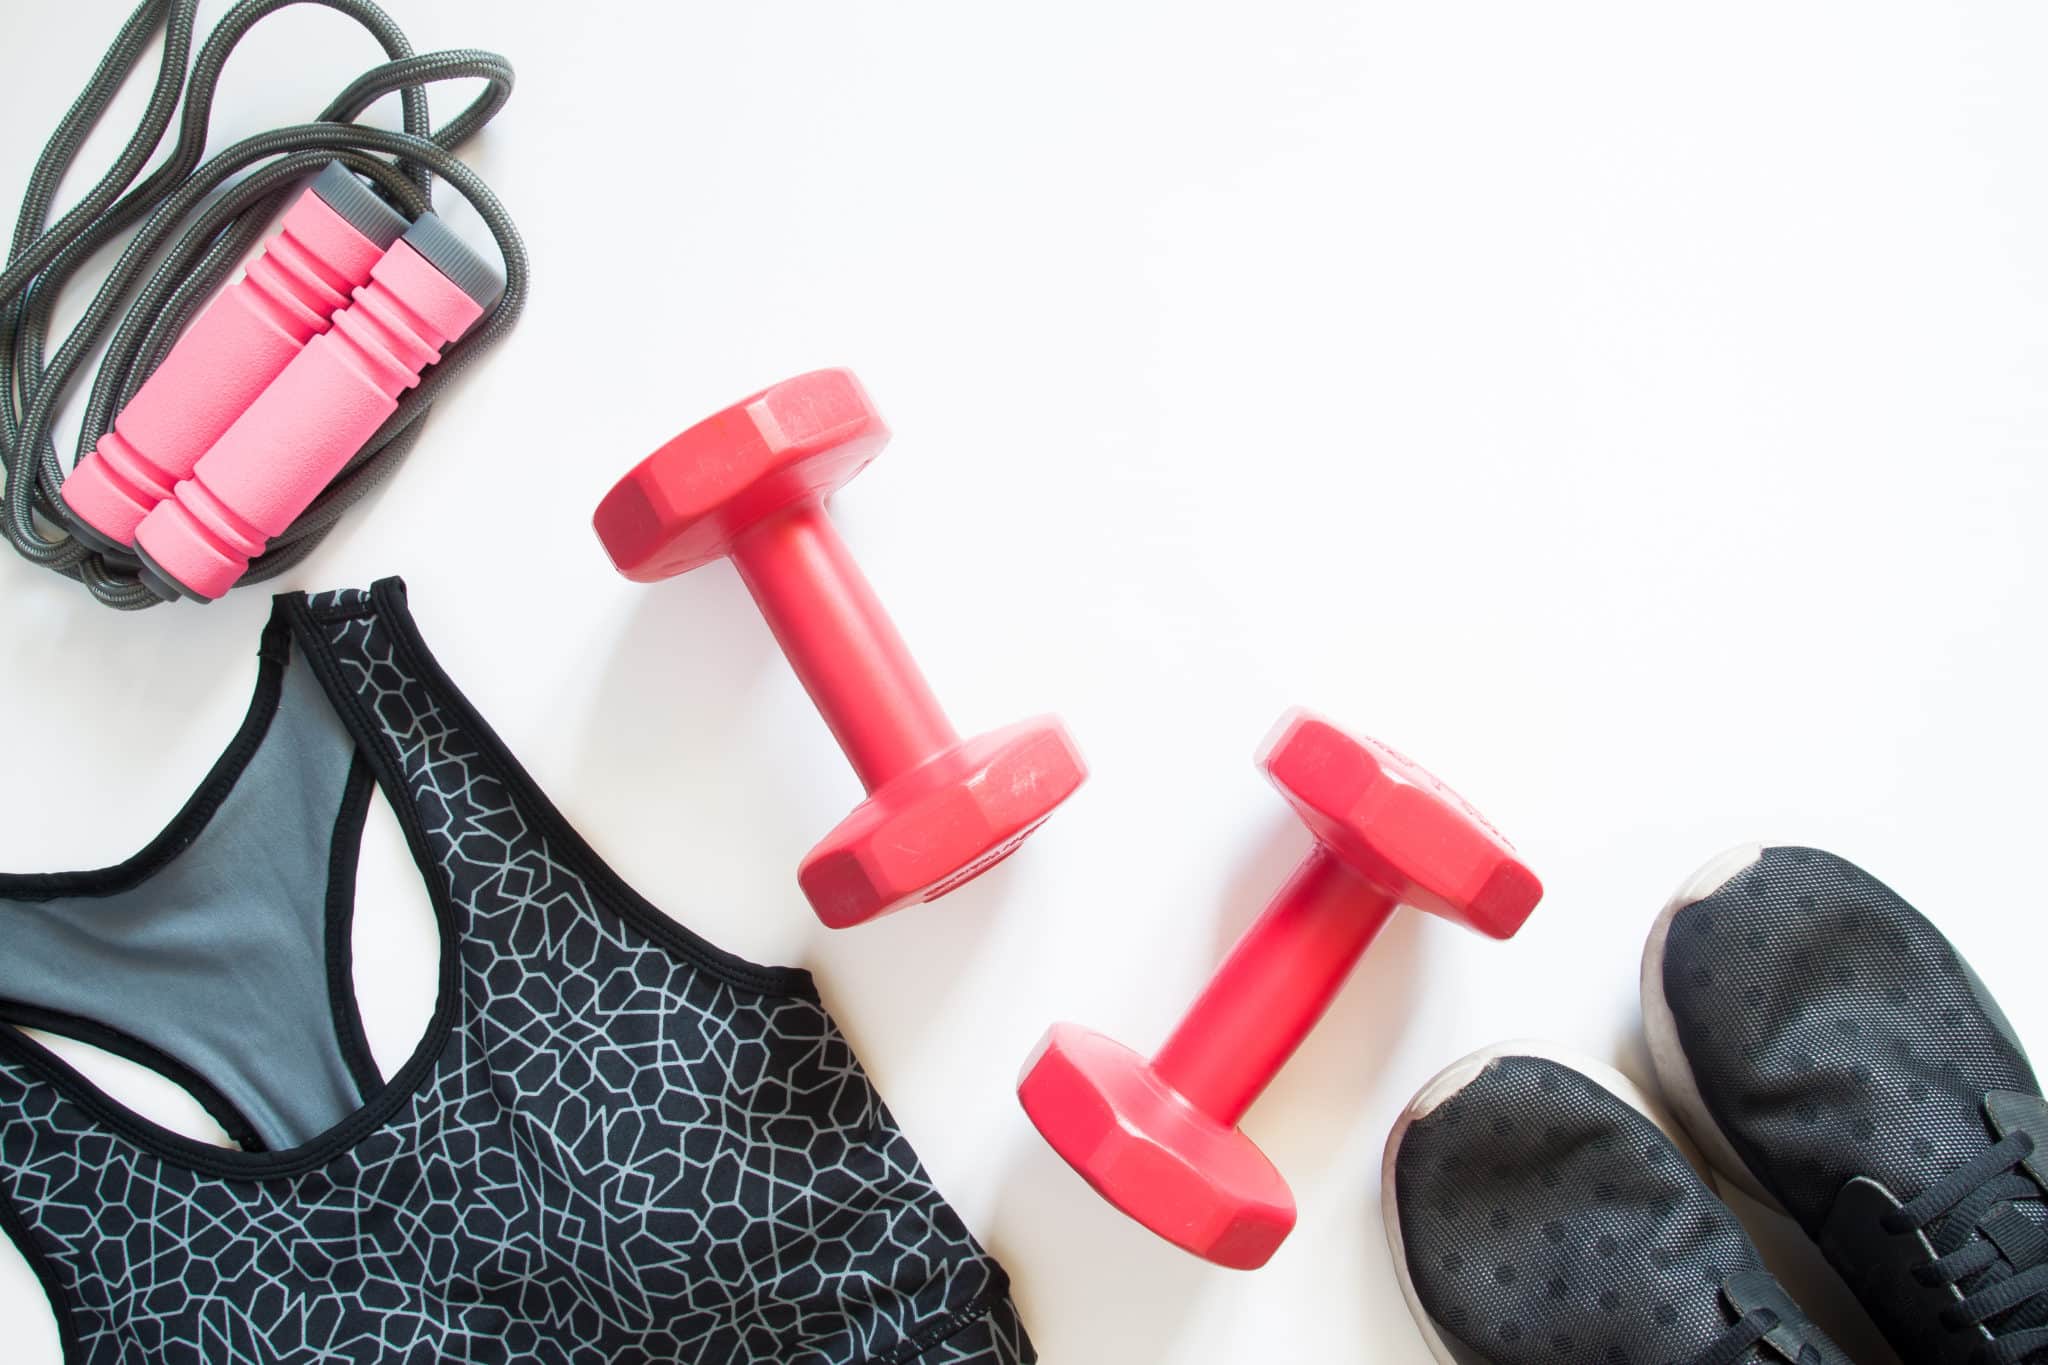 A pair of small pink dumbbells next to a sports bra and shoes.